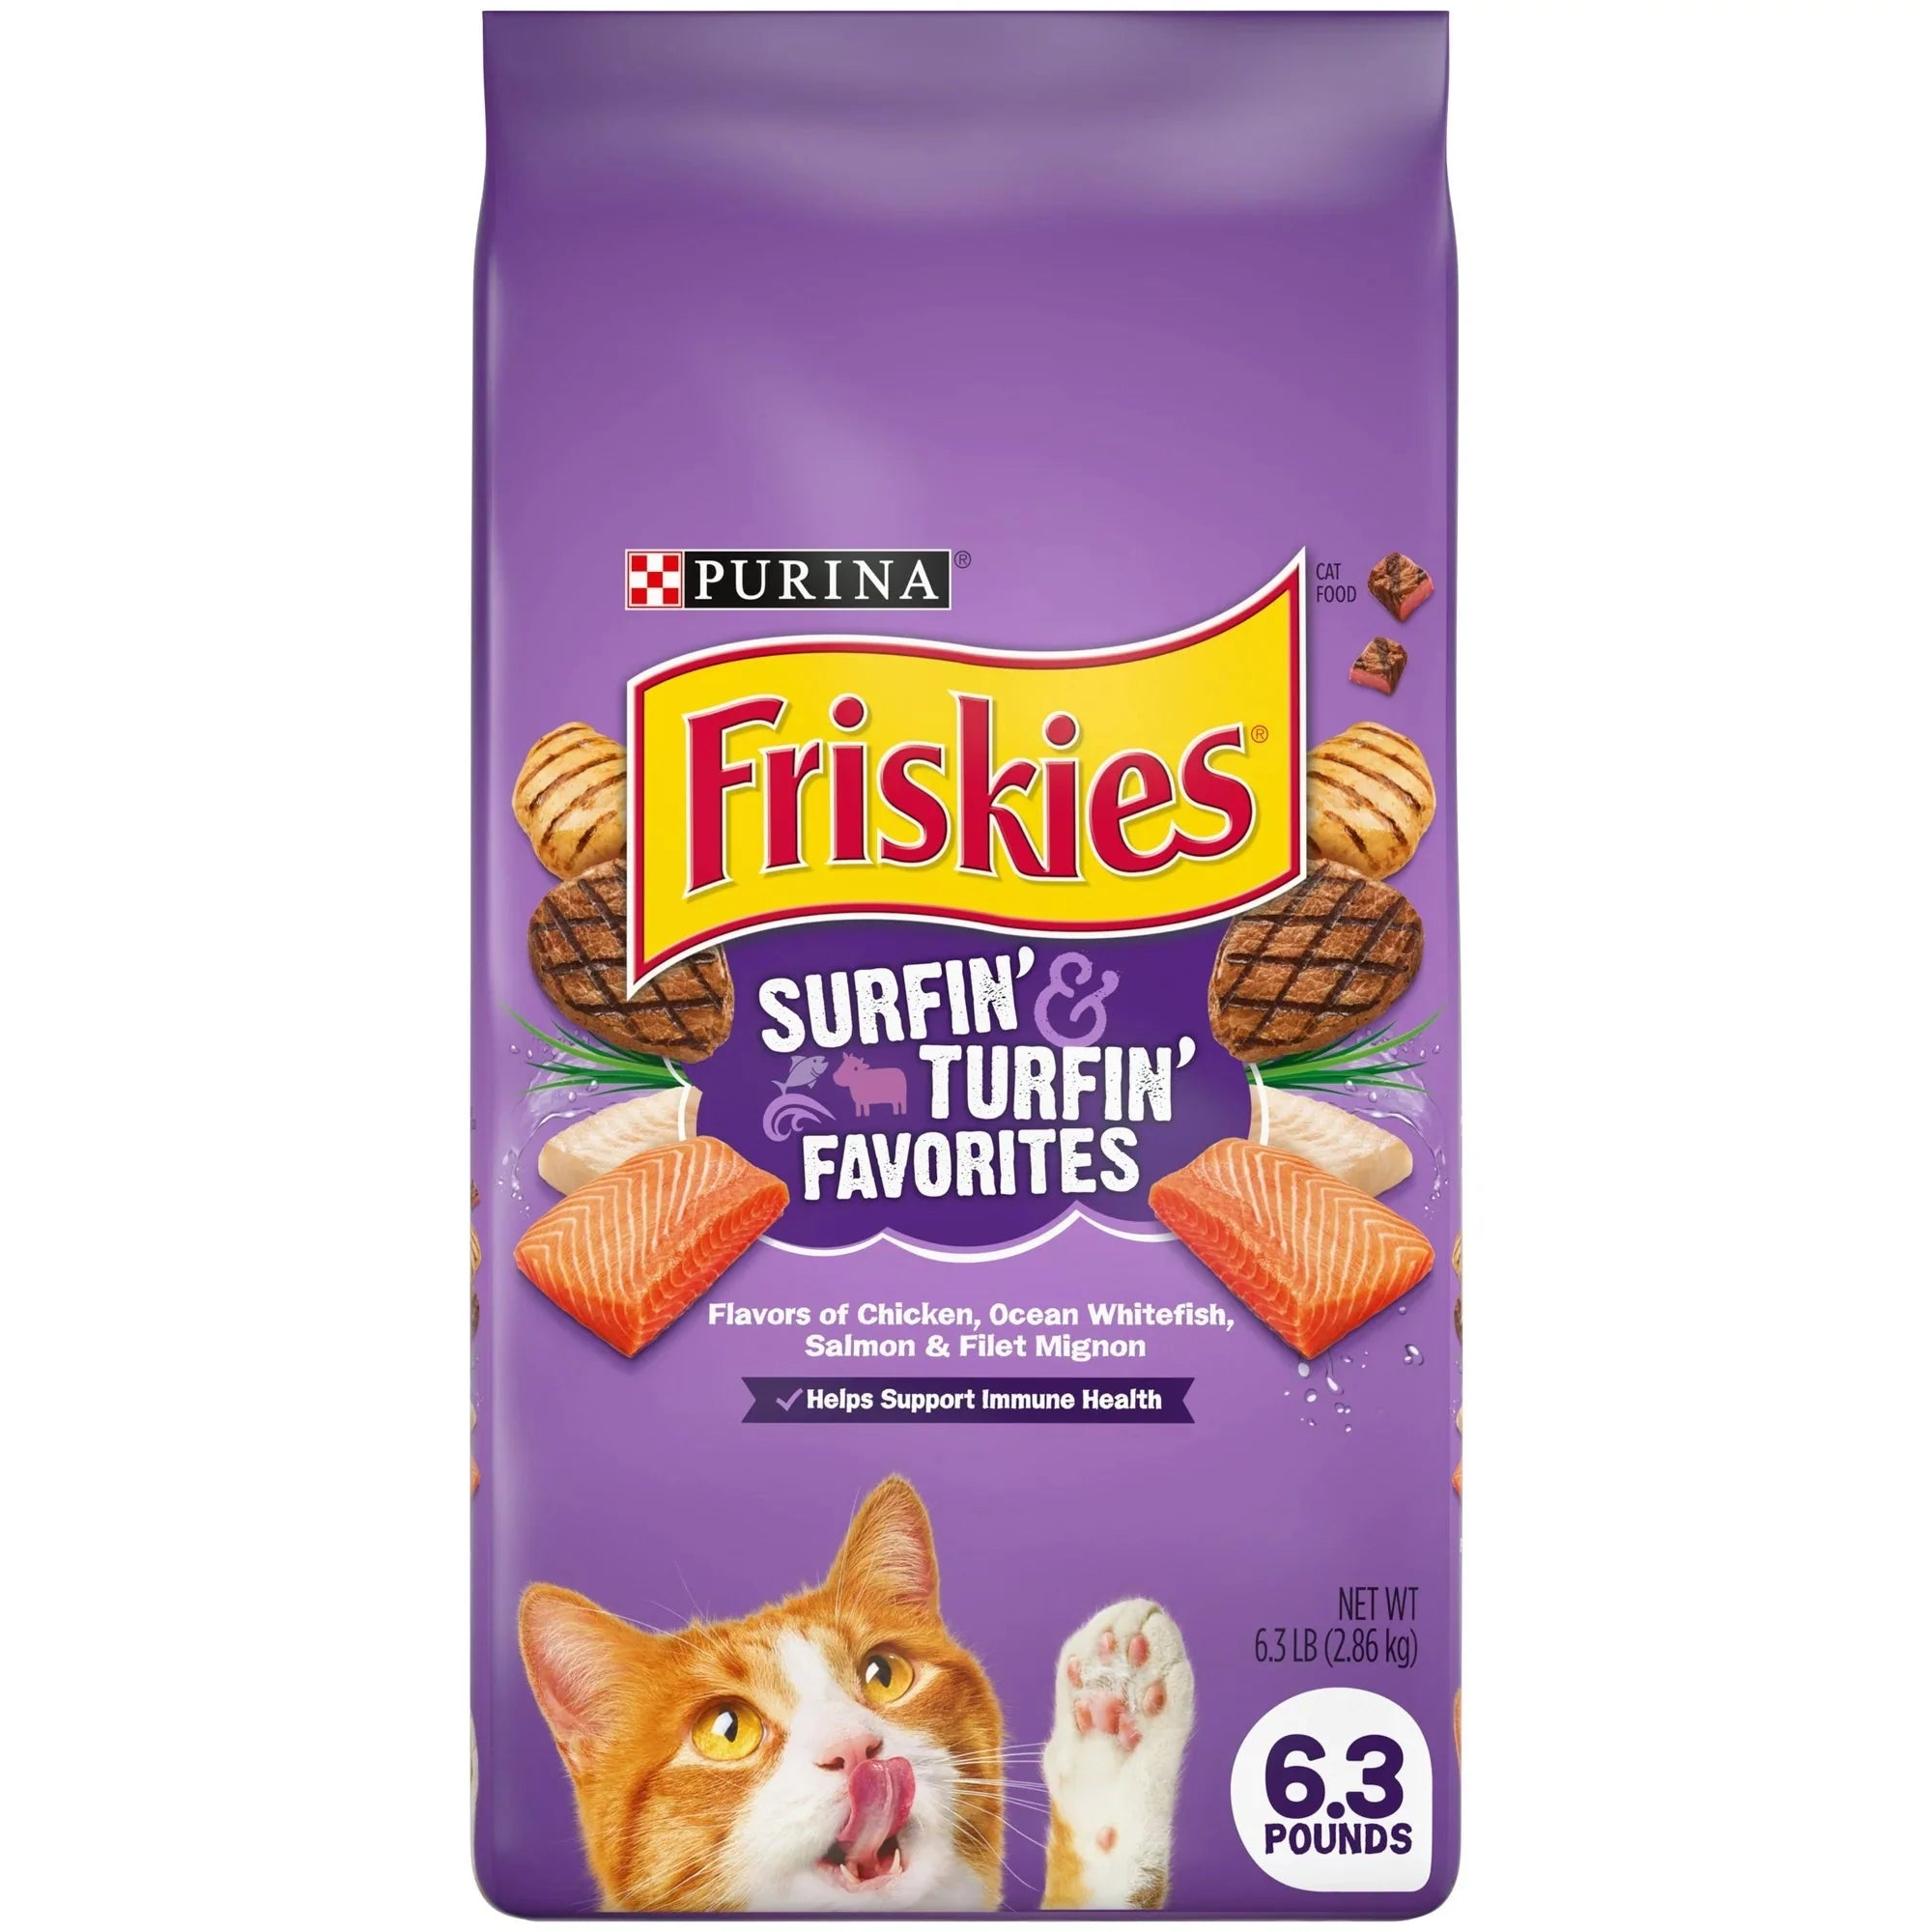 Wholesale prices with free shipping all over United States Friskies Dry Cat Food Surfin & Turfin Favorites 6.3 lb. Bag - Steven Deals